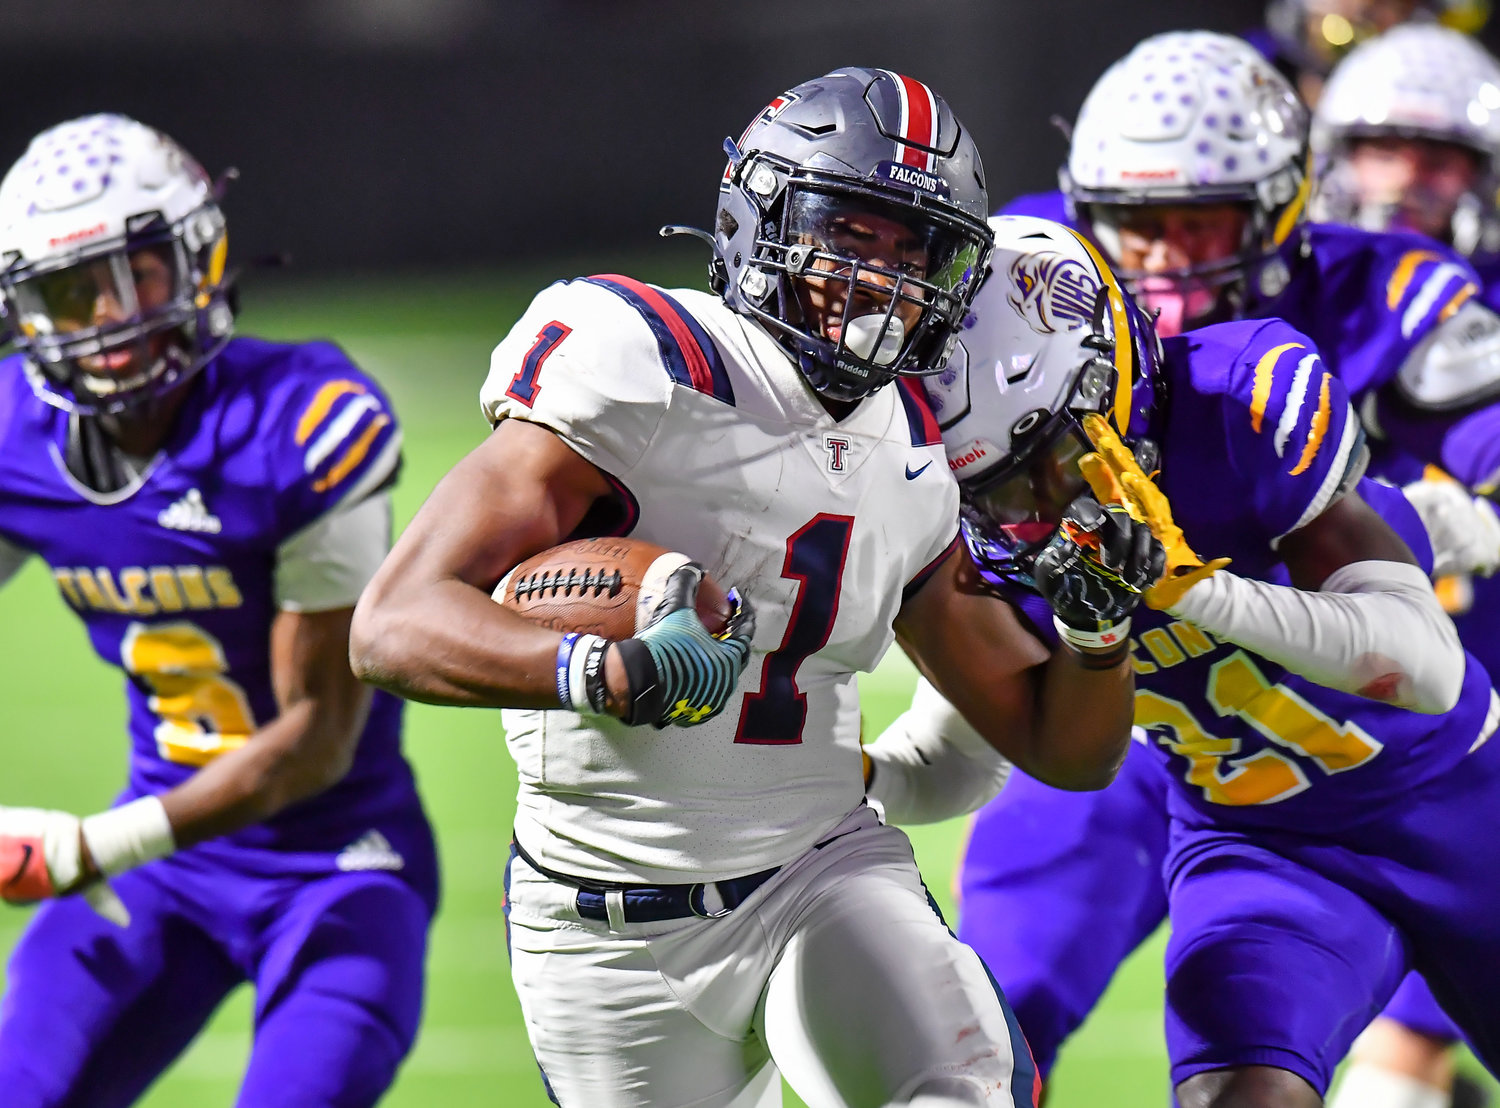 Houston Tx. Nov 19, 2021: Tompkins #1 Caleb Komolafe rushes for a TD during the UIL area playoff game between Tompkins and Jersey Village at Pridgeon Stadium in Houston. (Photo by Mark Goodman / Katy Times)